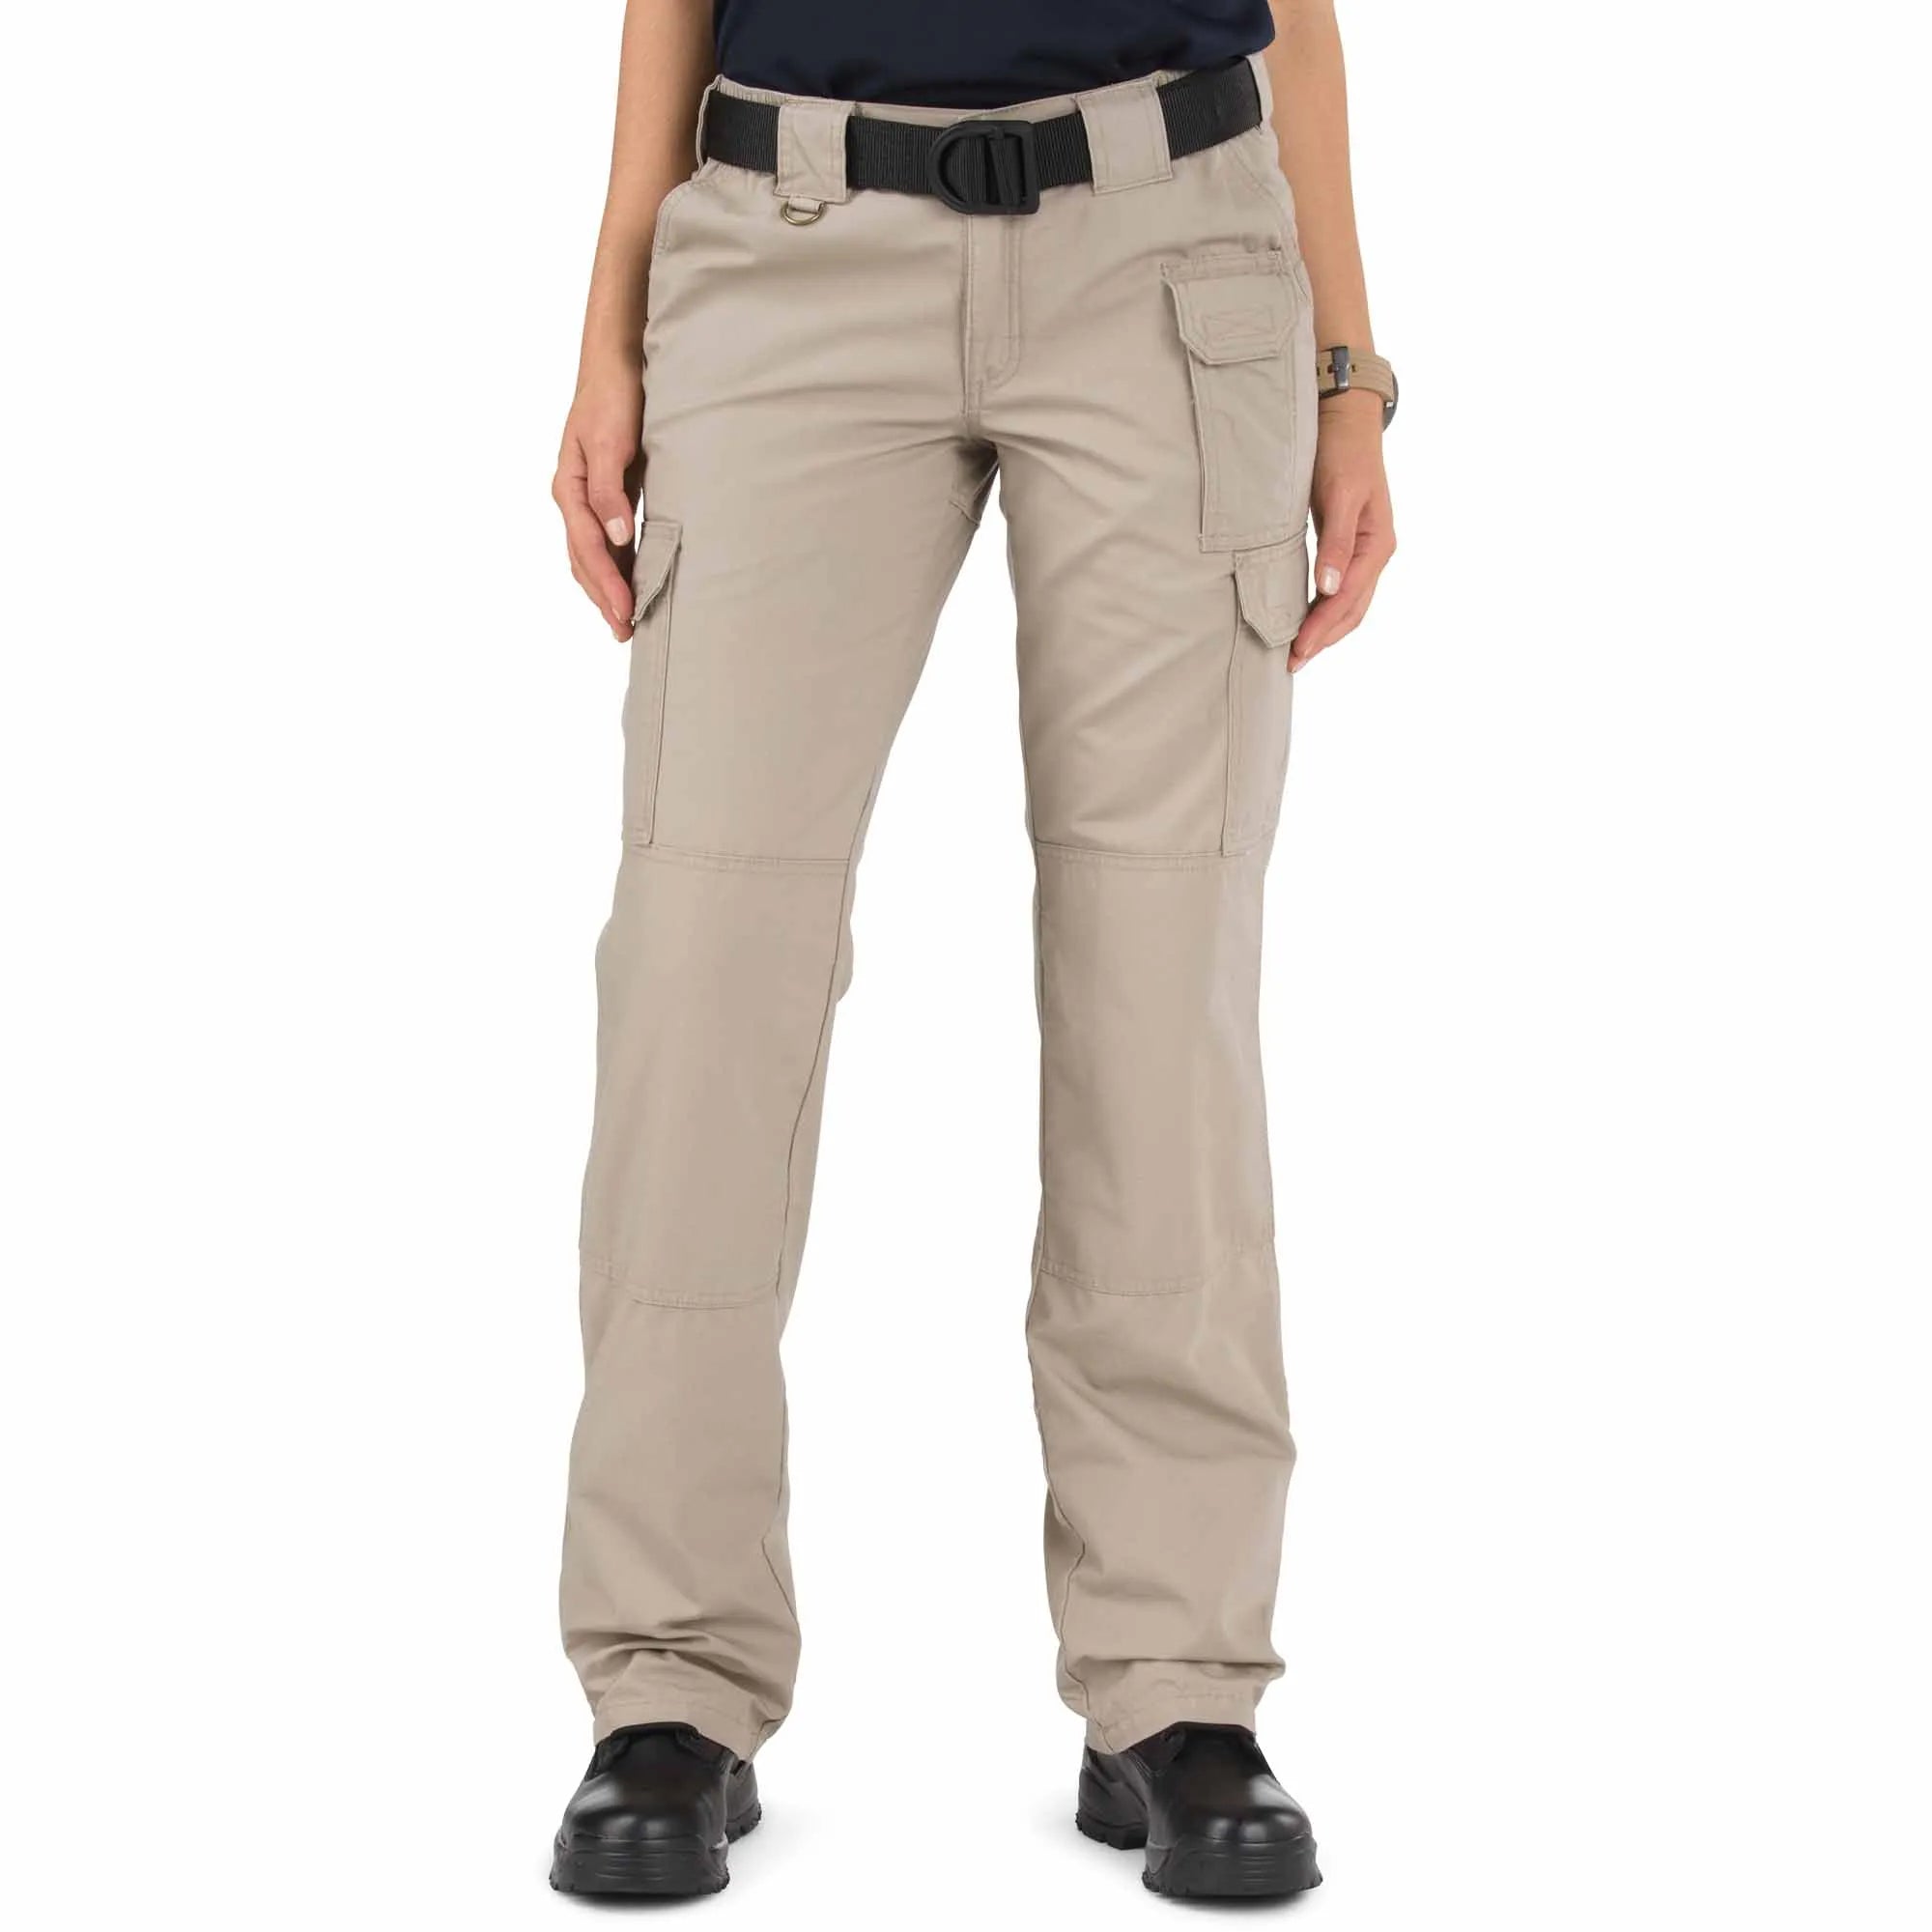 5.11 Tactical Women's Tactical Pant 64358 - Clothing & Accessories